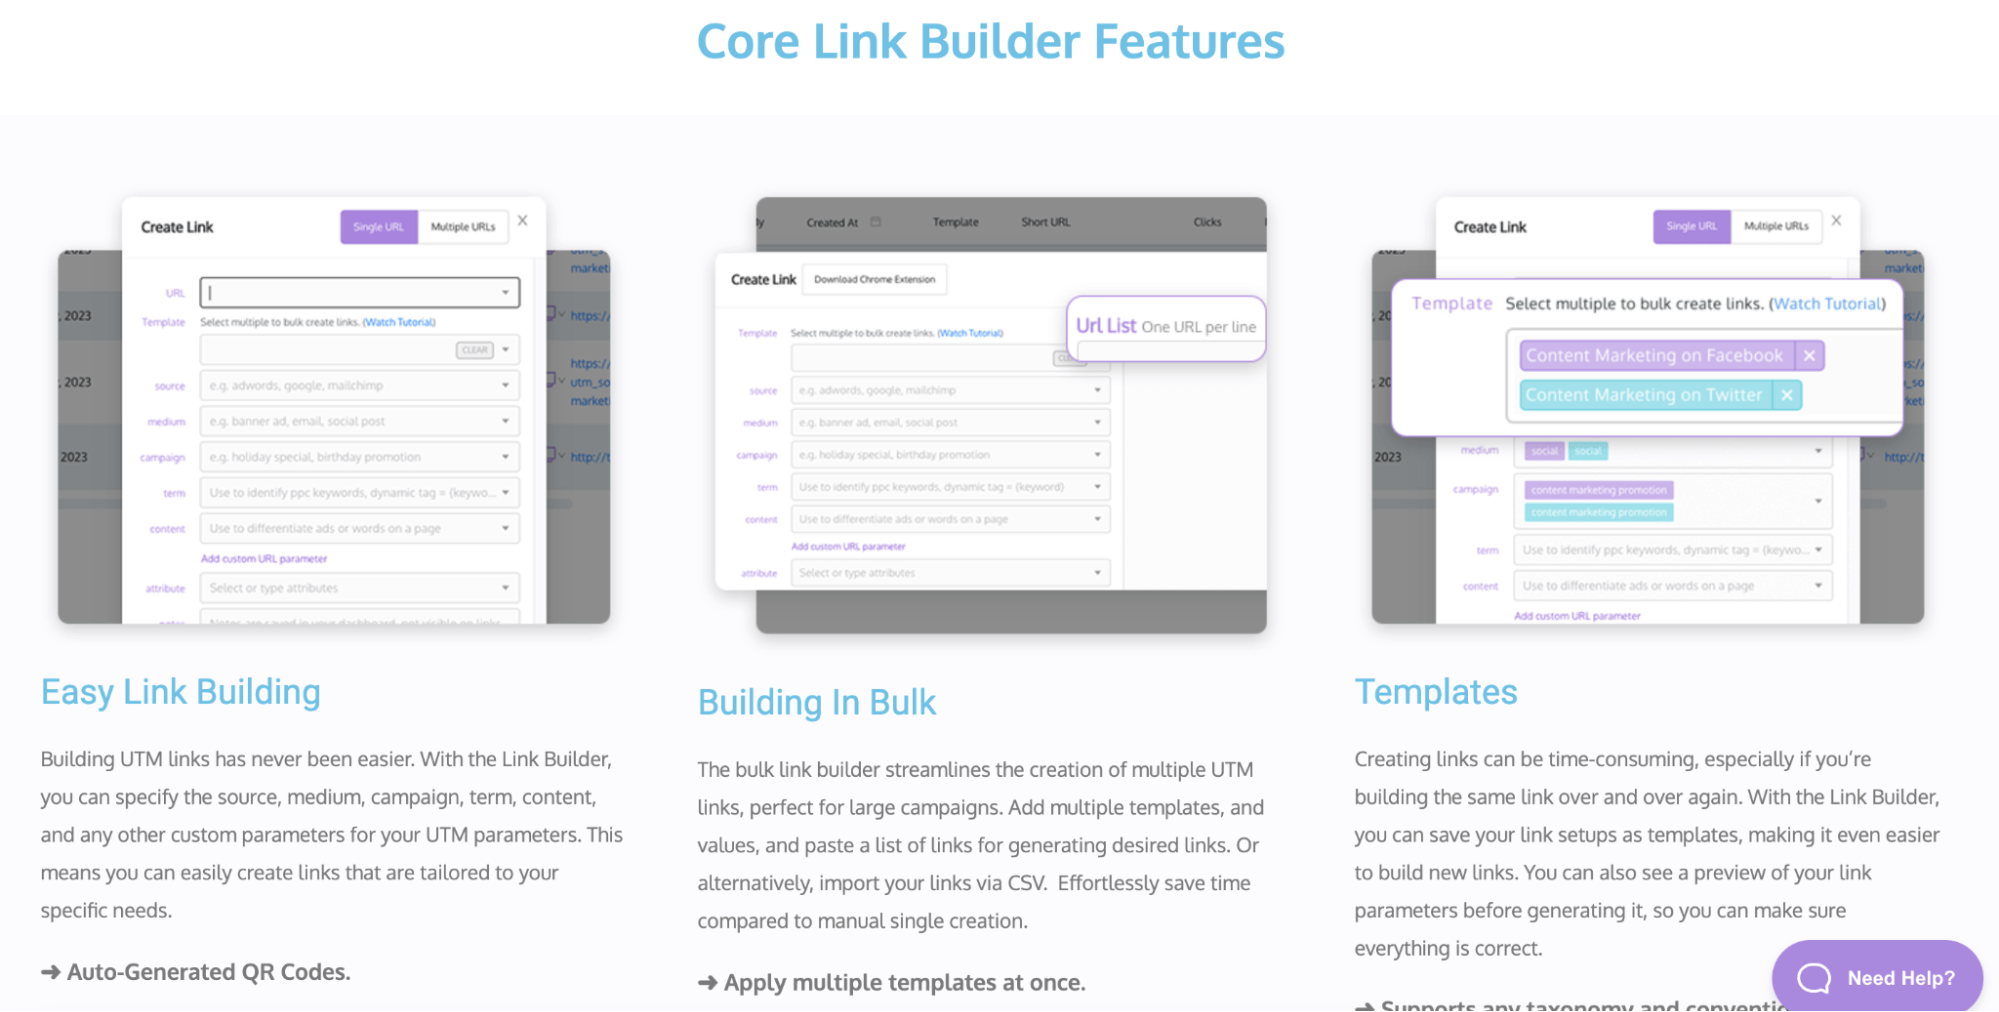 The image displays a section of UTM.io webpage demonstrating the usefulness of the tool for Core Link builder features including easy link building, building in bulk, and templates.